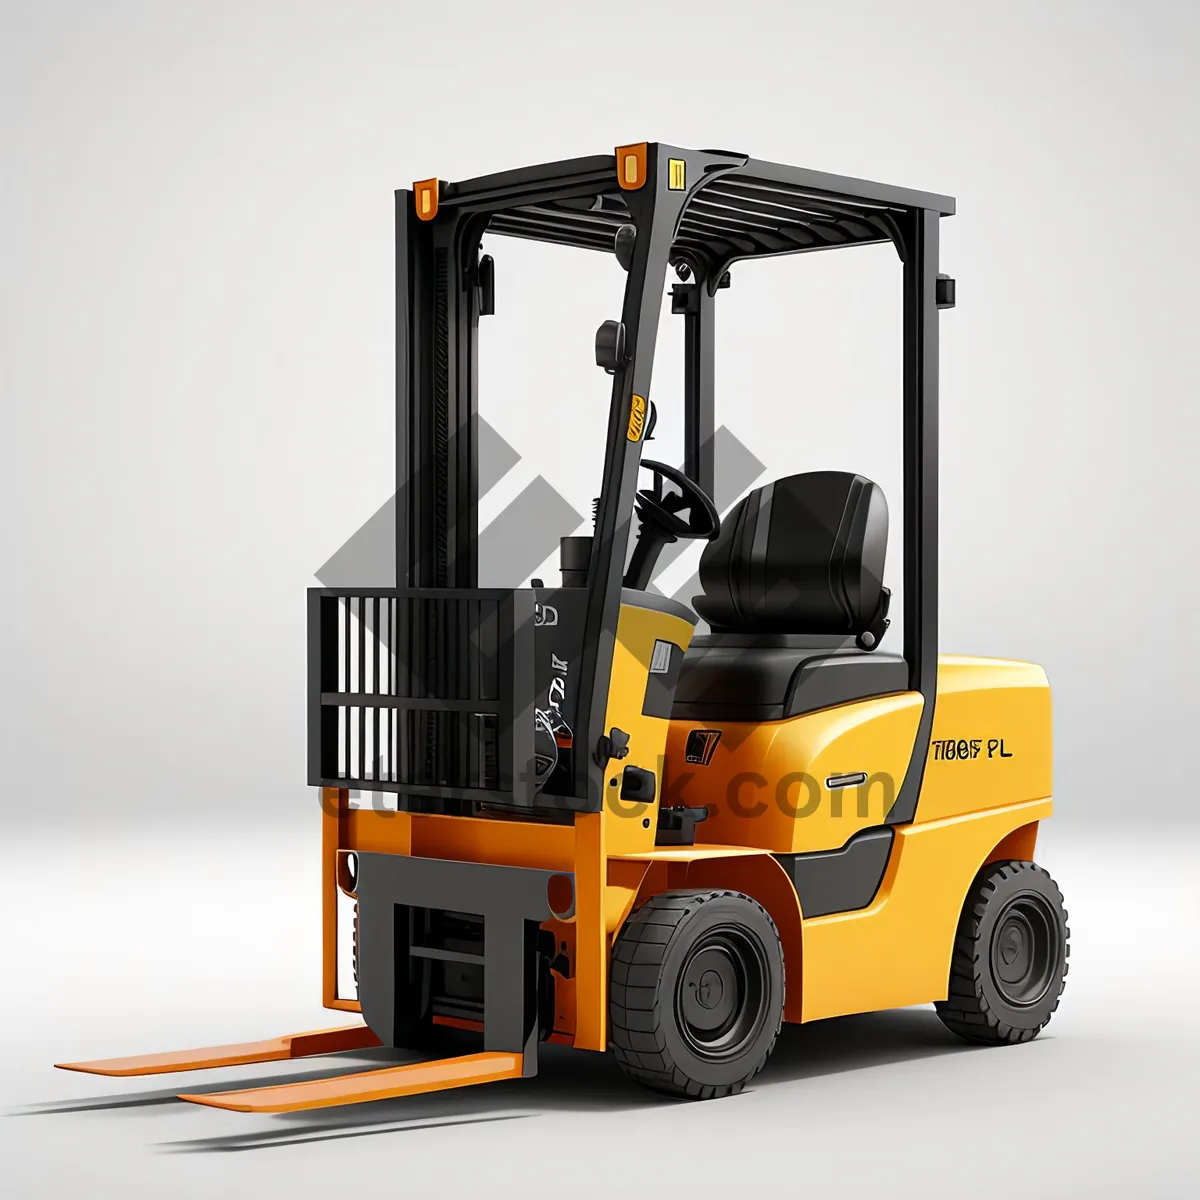 Picture of Yellow Heavy-Duty Forklift Truck at Construction Site.